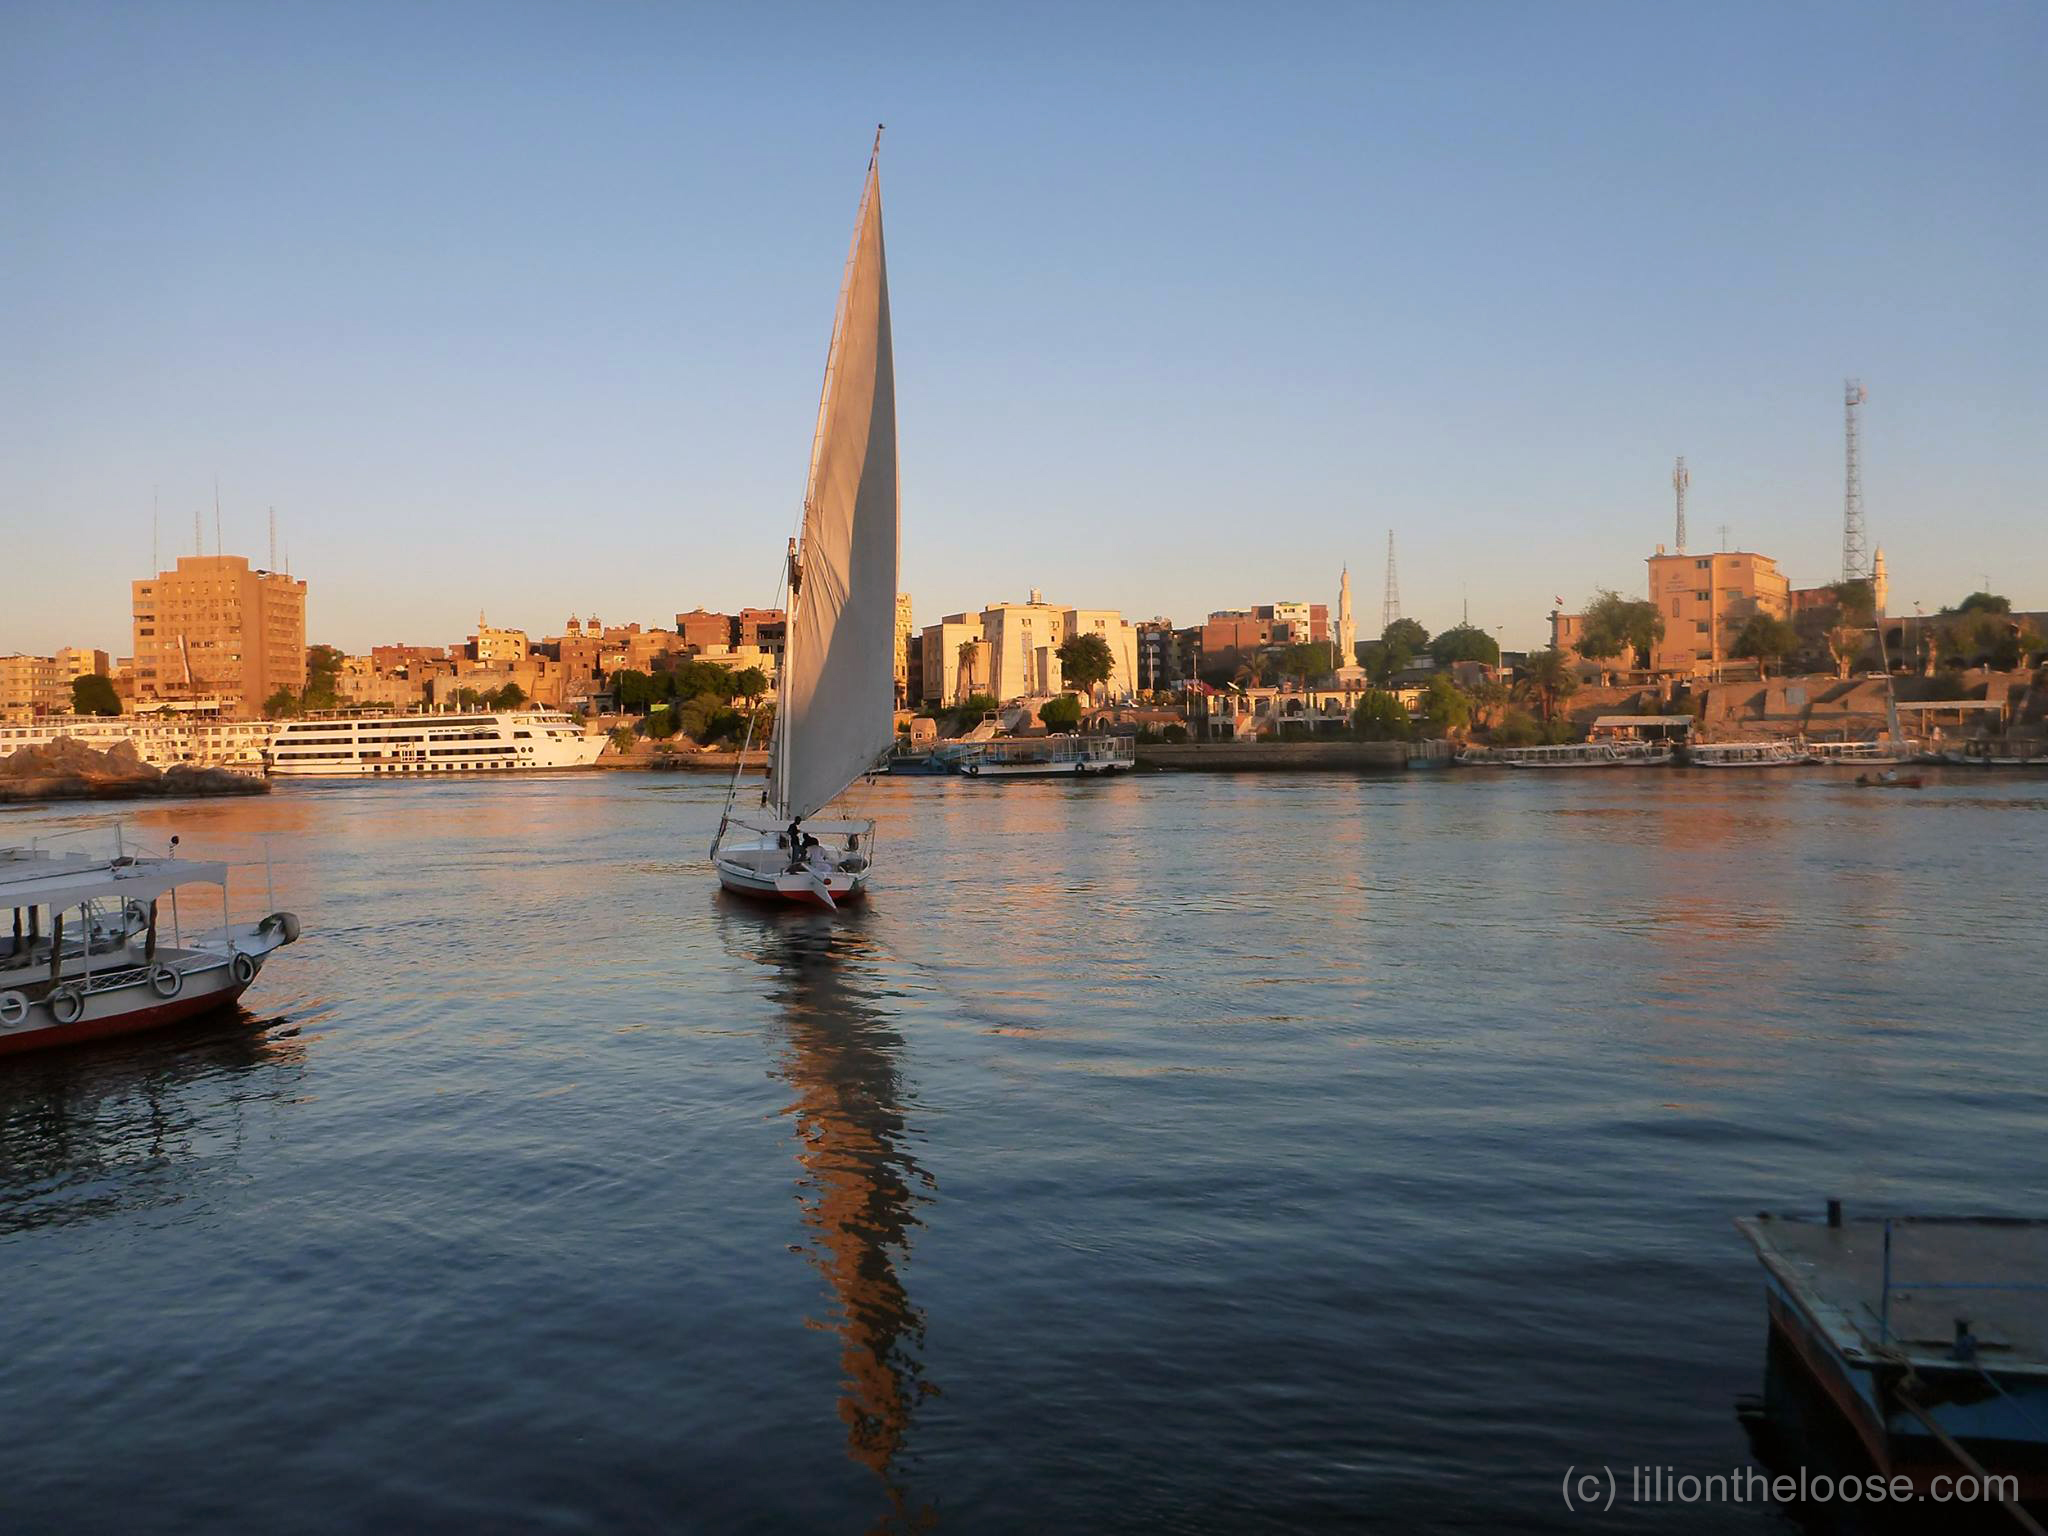 Our Felucca as it sailed away.